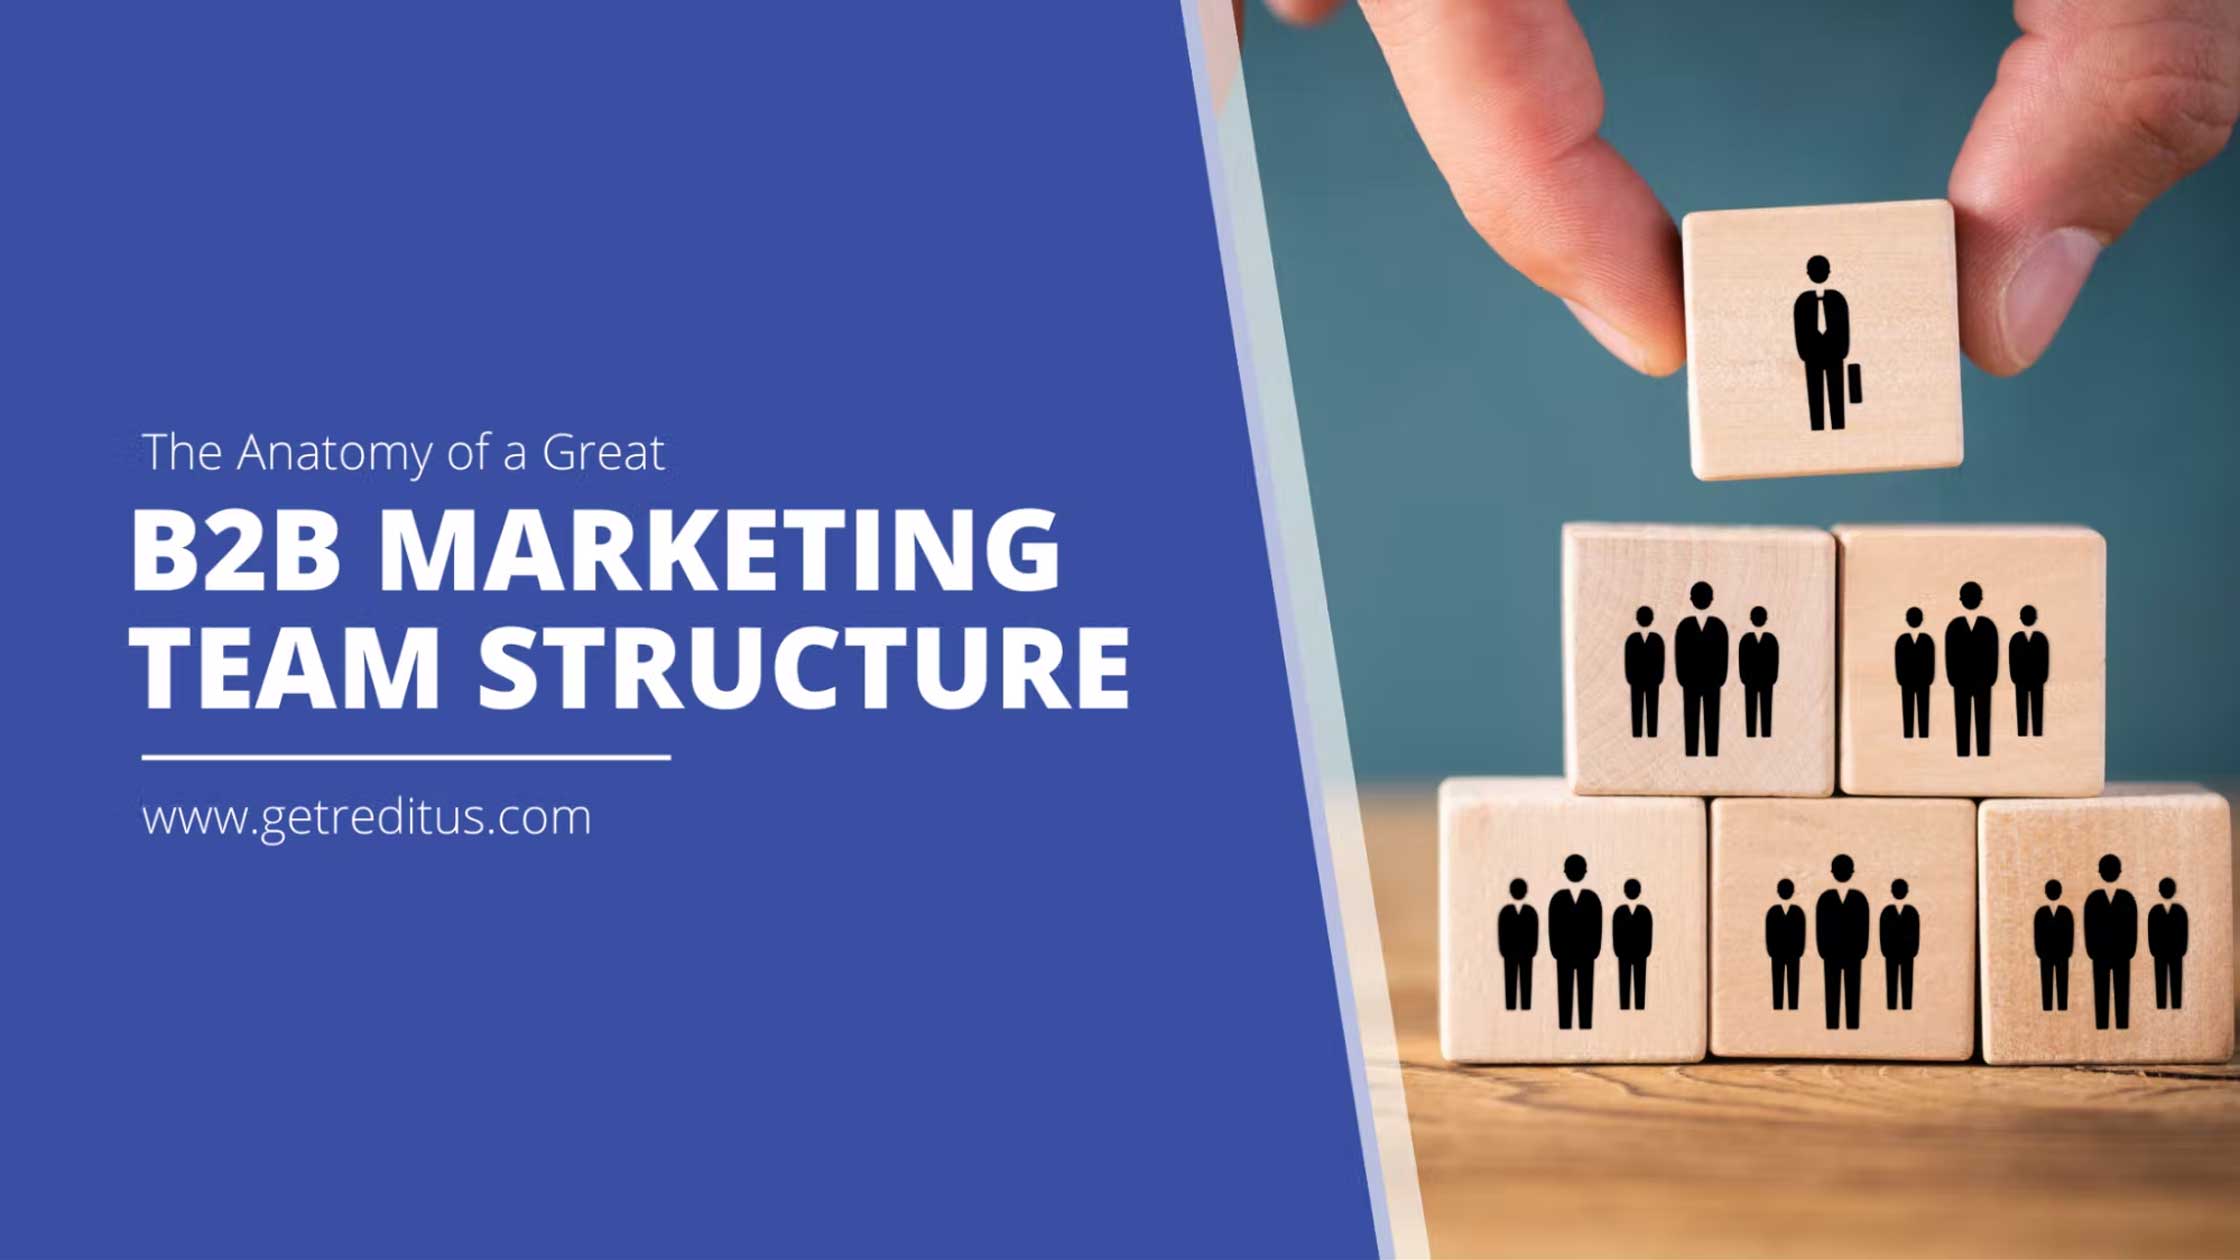 The Anatomy of a Great B2B Marketing Team Structure